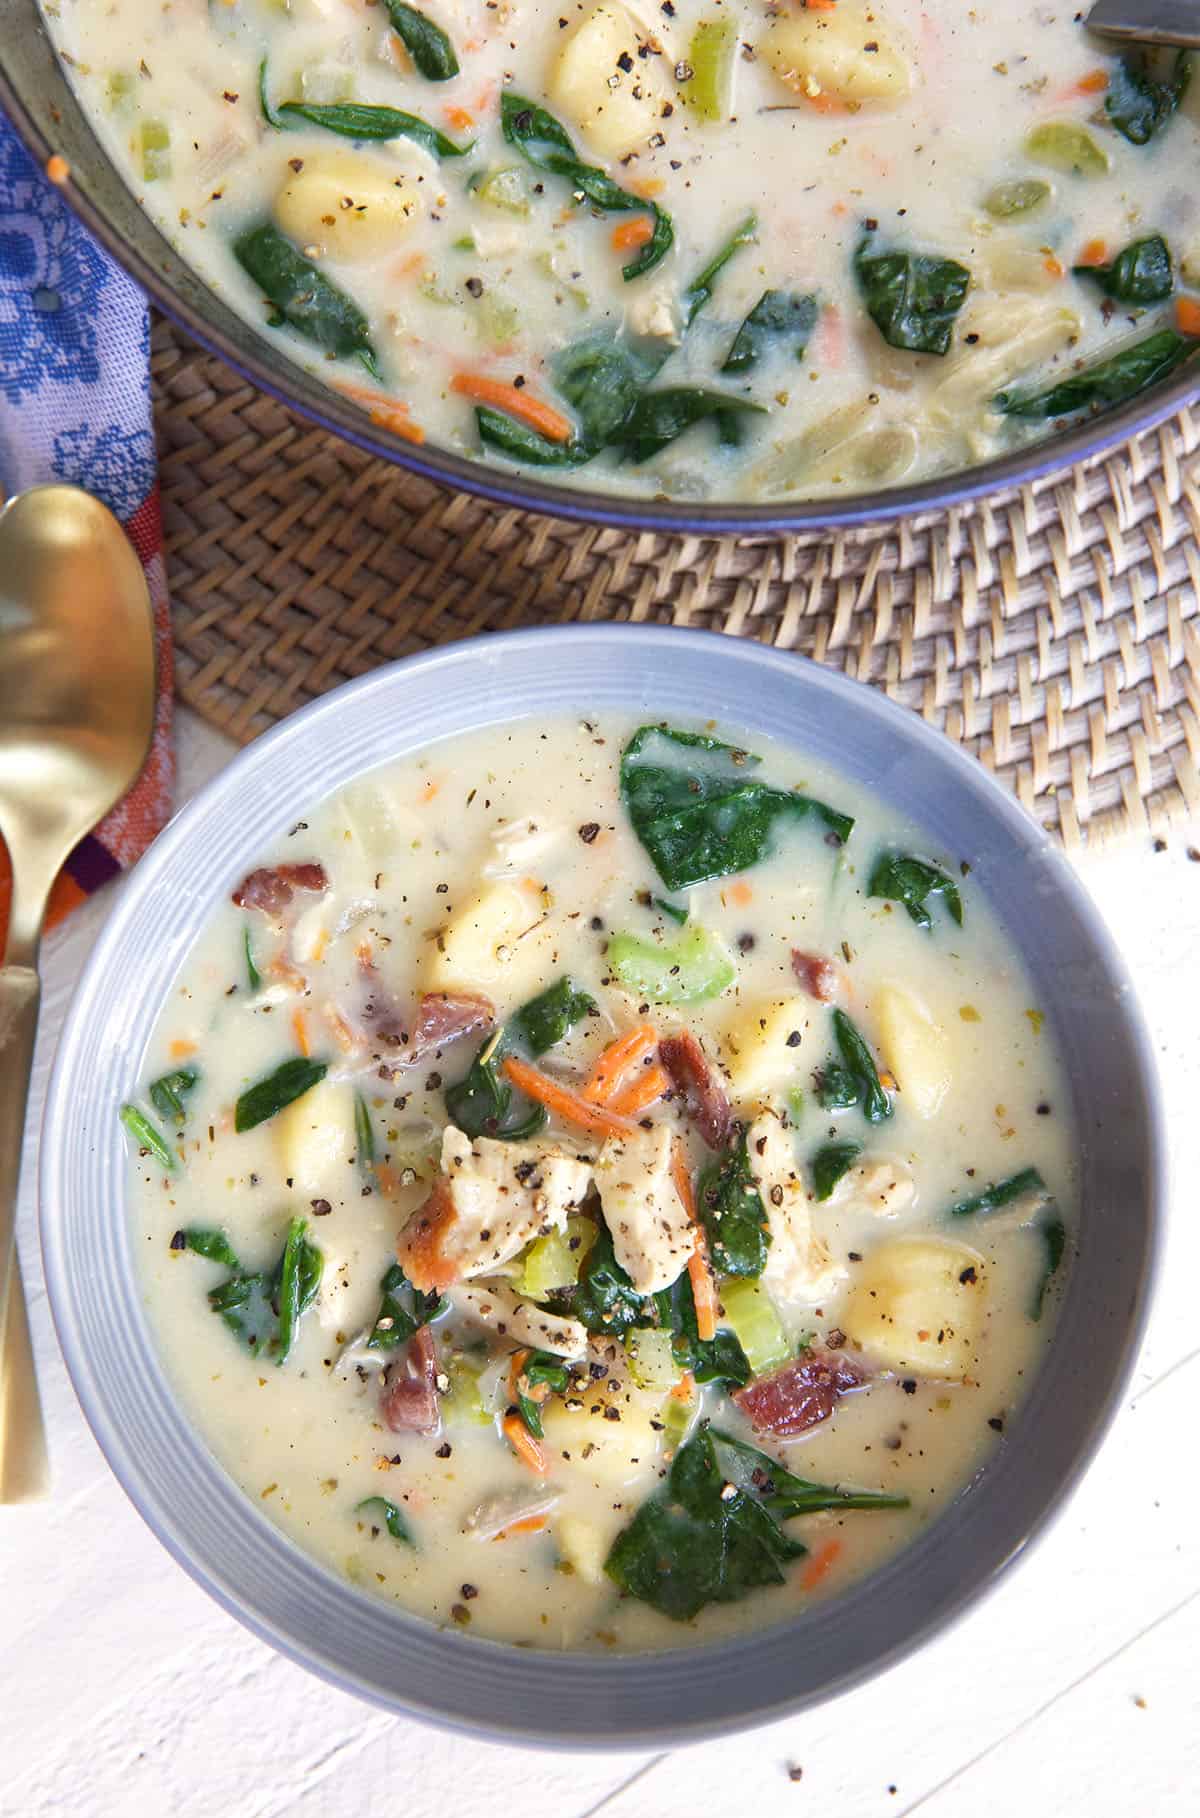 A bowl of chicken and gnocchi soup is placed next to a pot.